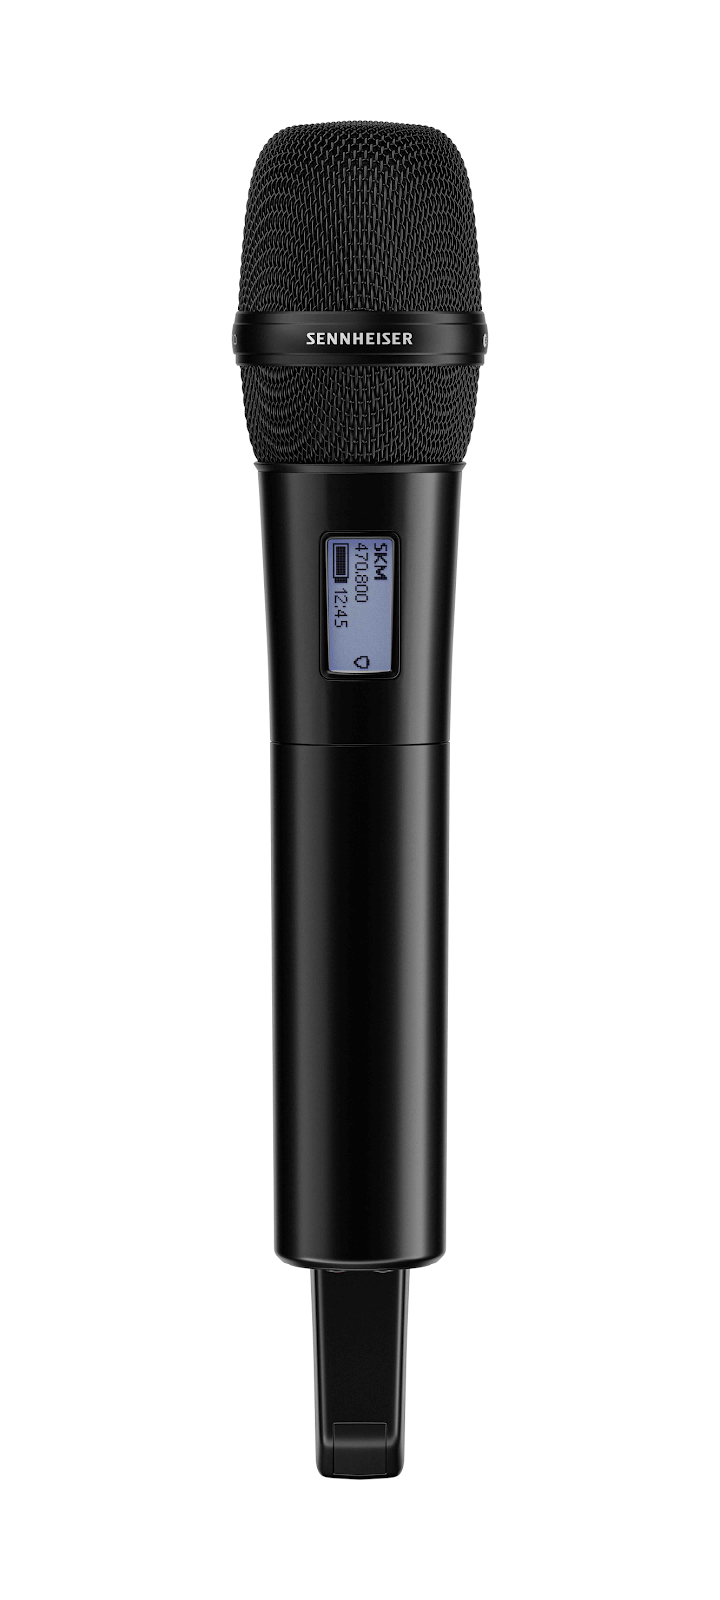 A picture containing microphone

Description automatically generated